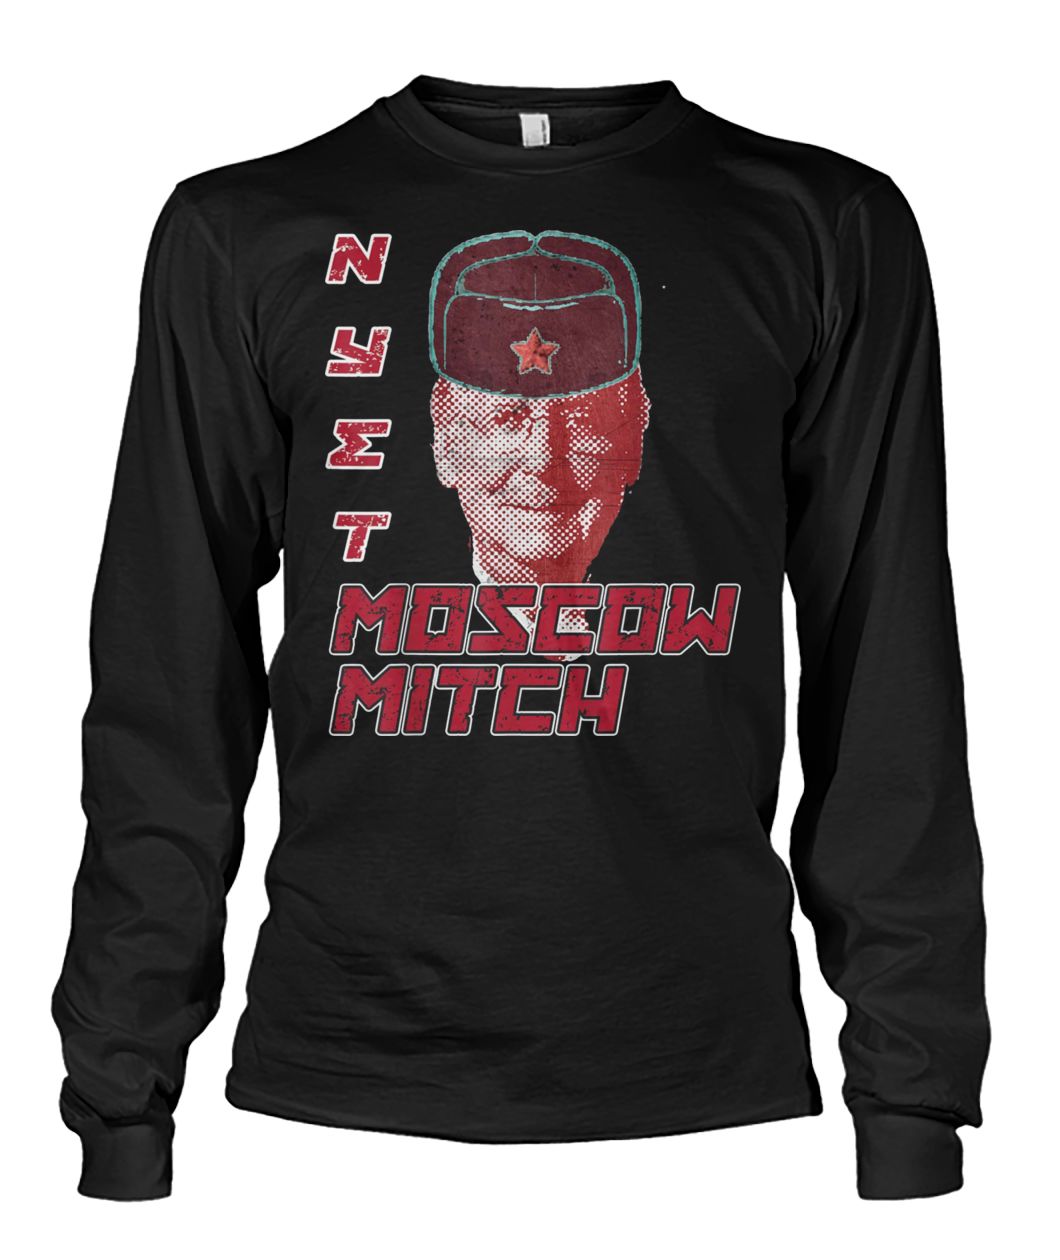 Moscow mitch mcconnell nyet unisex long sleeve